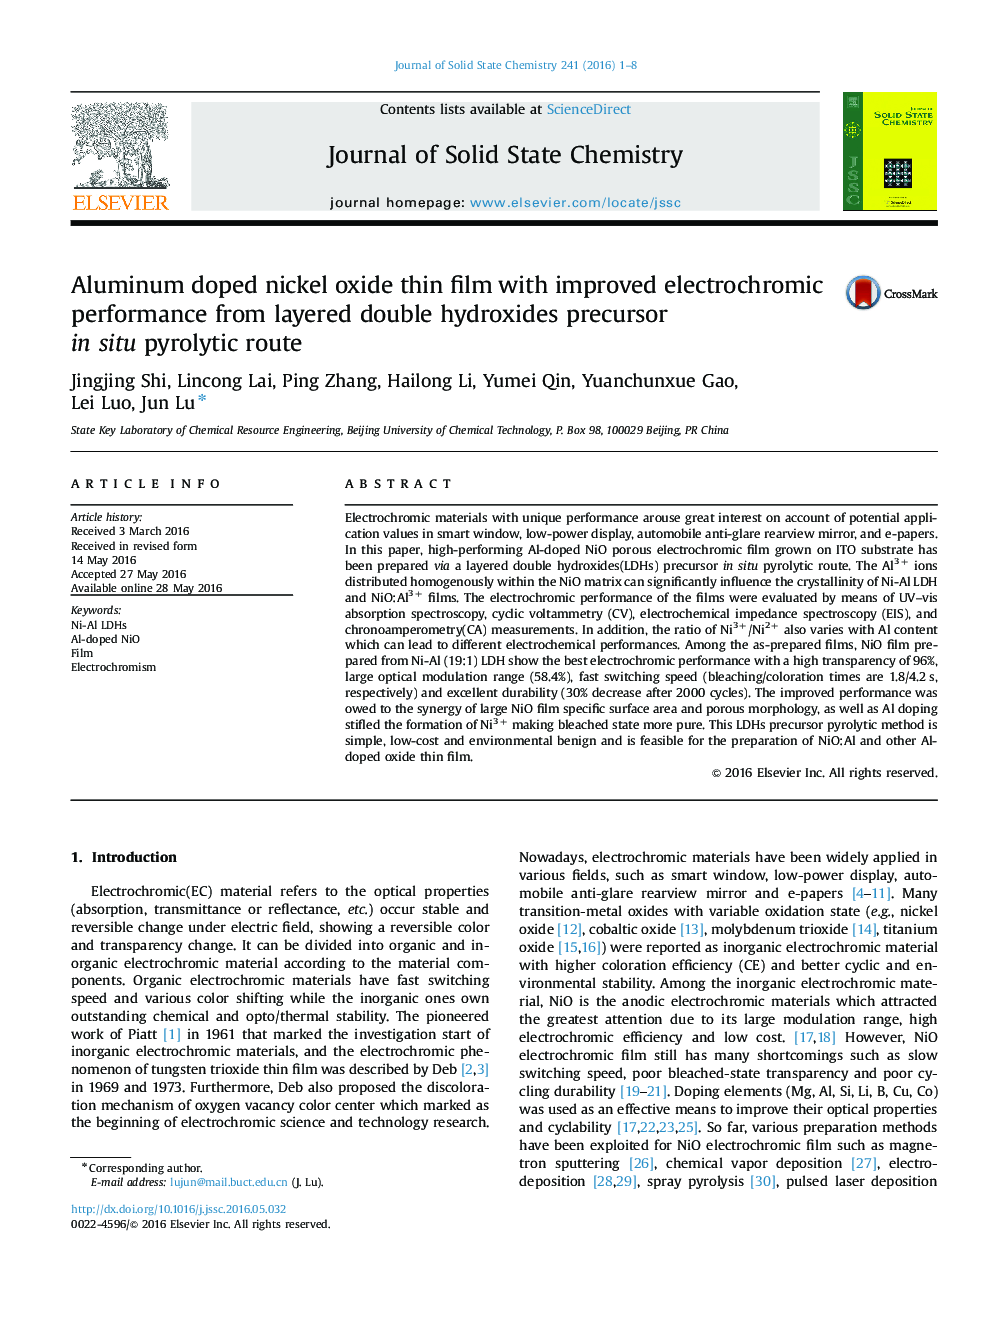 Aluminum doped nickel oxide thin film with improved electrochromic performance from layered double hydroxides precursor in situ pyrolytic route